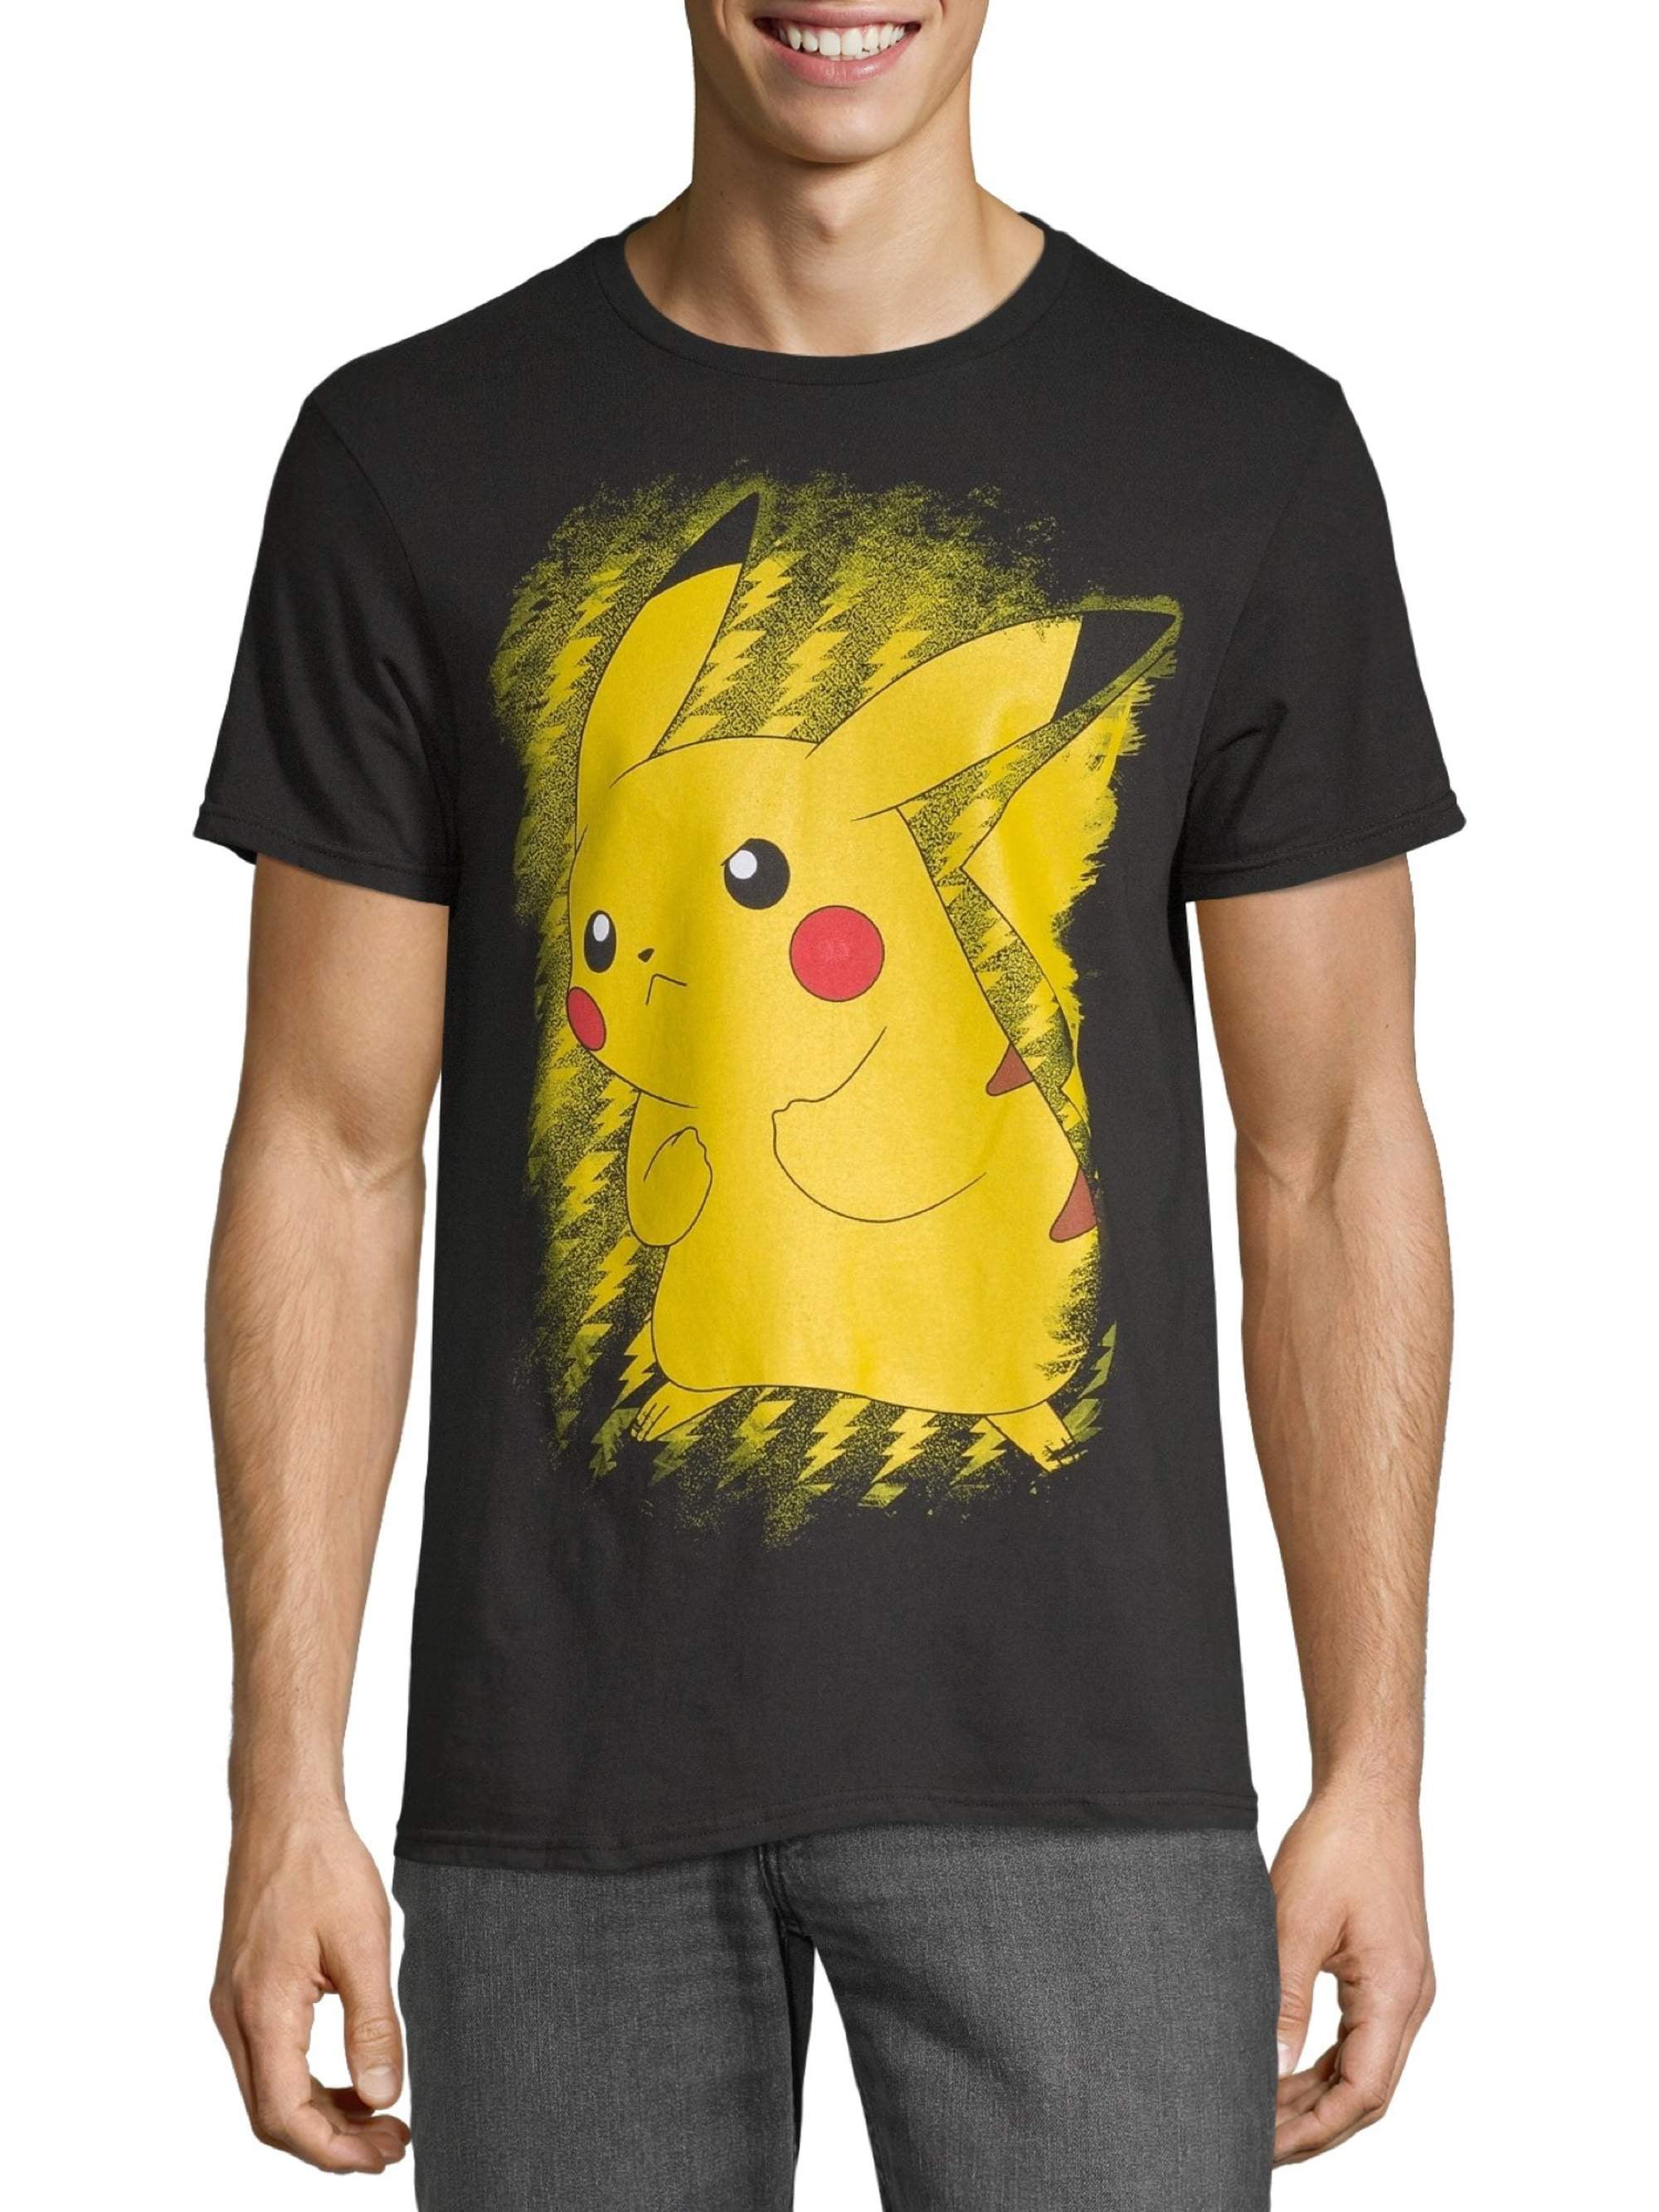 New Pokemon Tee Detective Pikachu Boys Collectible Graphic Red T-Shirt  L XL 